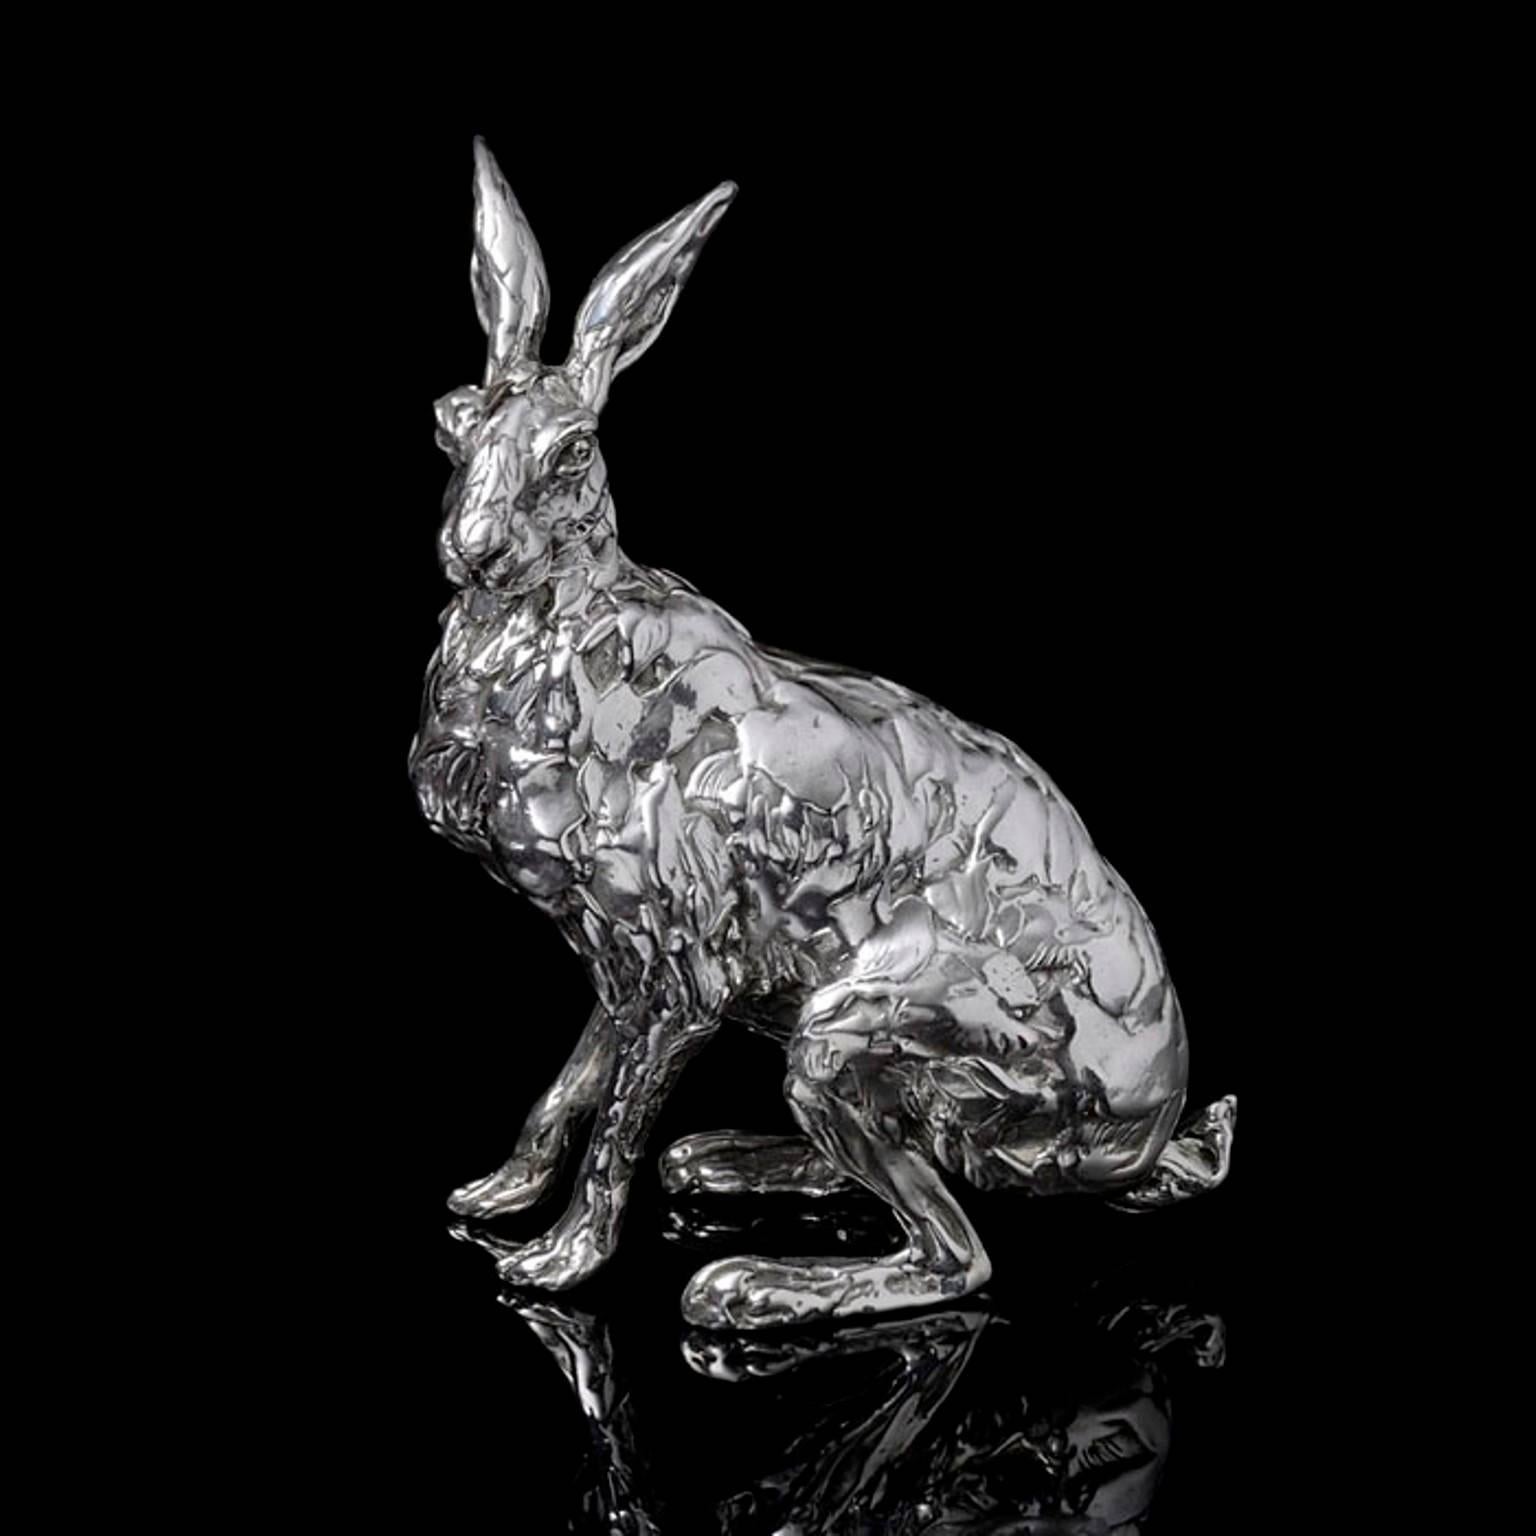 18cm high x 13cm long
1069 grams

A 'Seated Hare' sterling silver sculpture by Lucy Kinsella, the limited edition finely modelled hare sits upright and alert, his front legs straight, muscles tensed, poised to run at any moment.  His long ears are